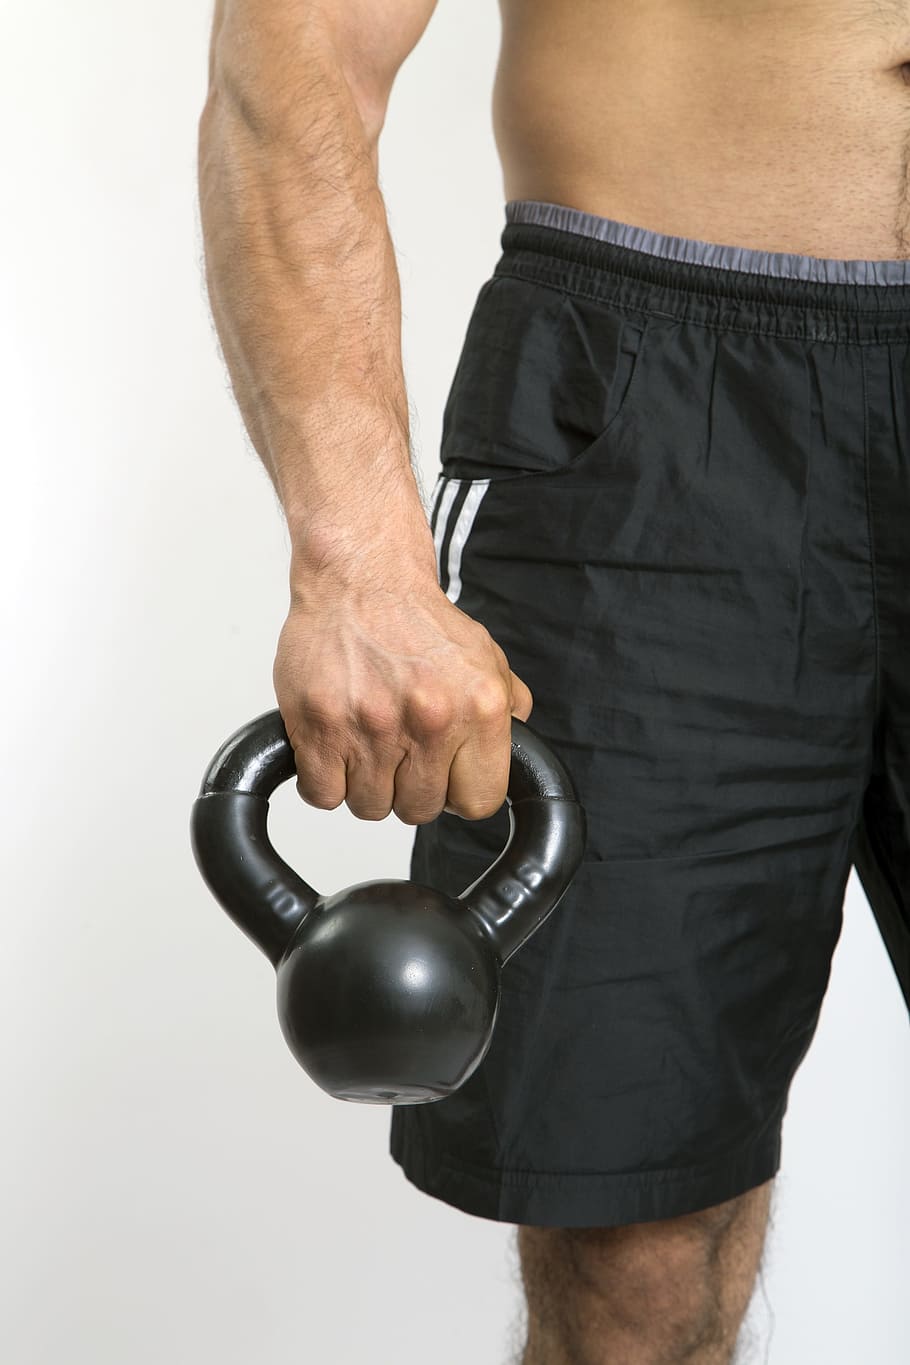 black kettle bell, kettlebell, arm, strong arm, sport, body, one person, men, white background, midsection